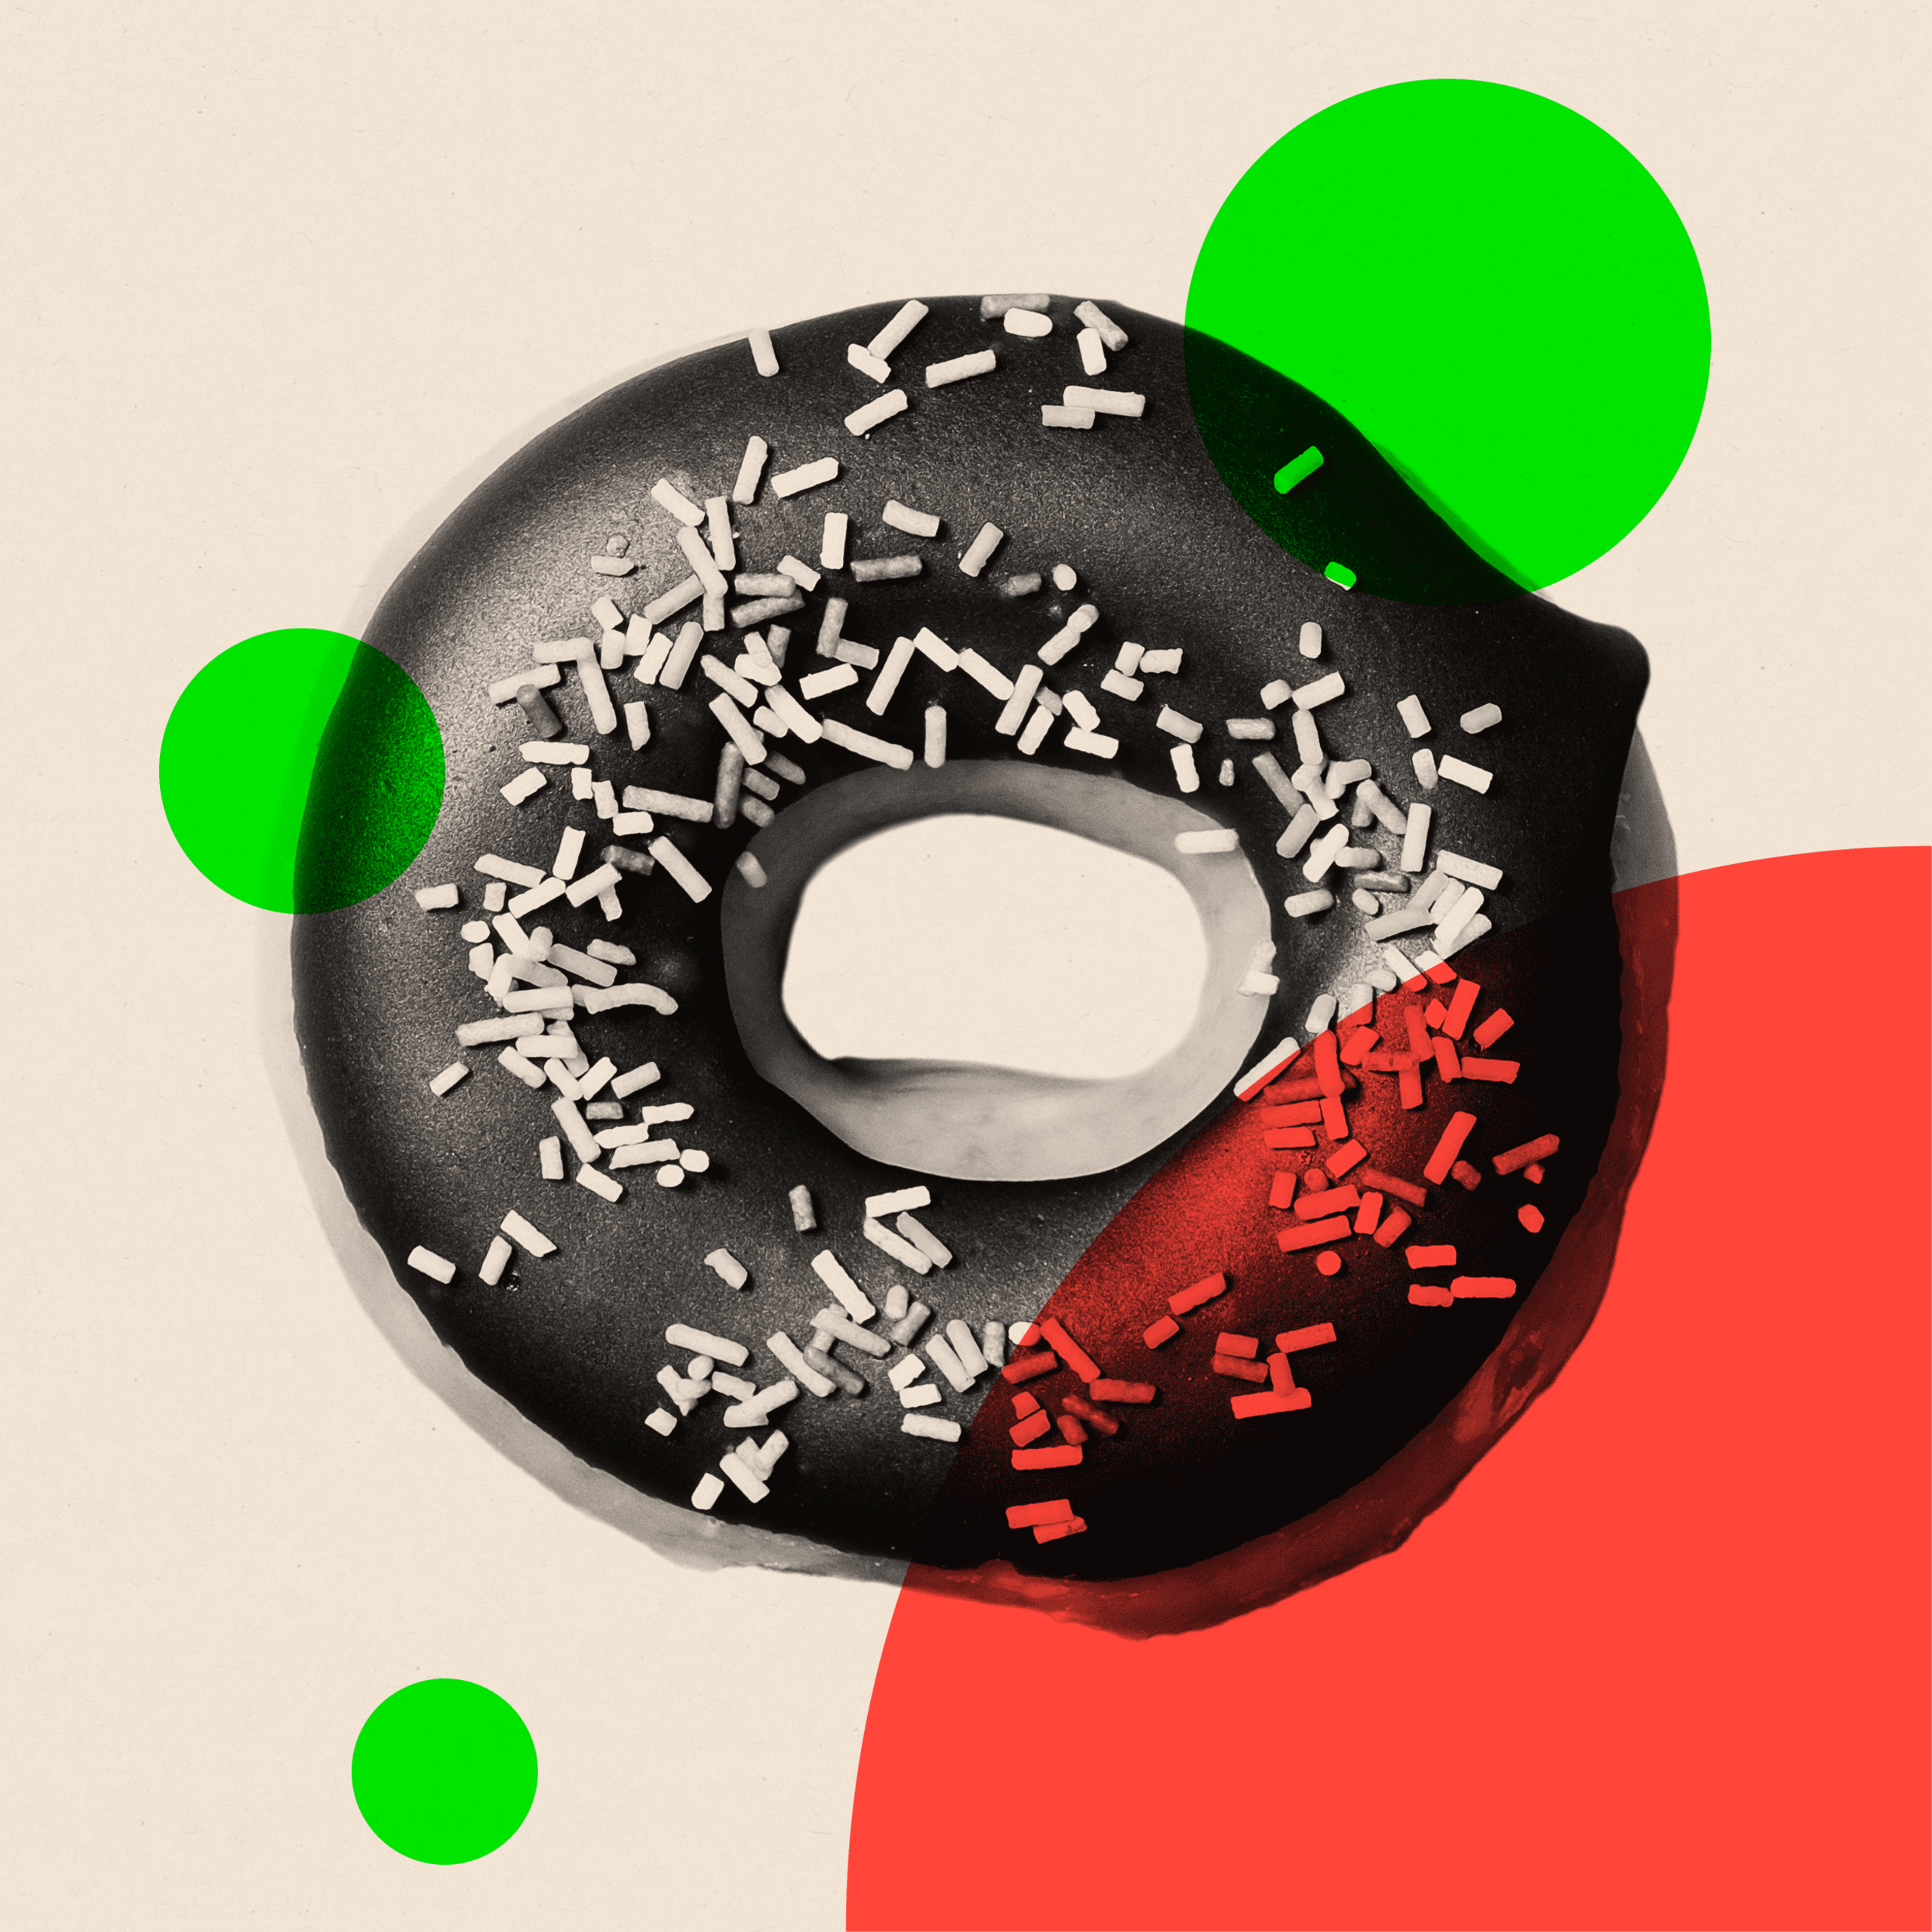 Montage showing a chocolate donut